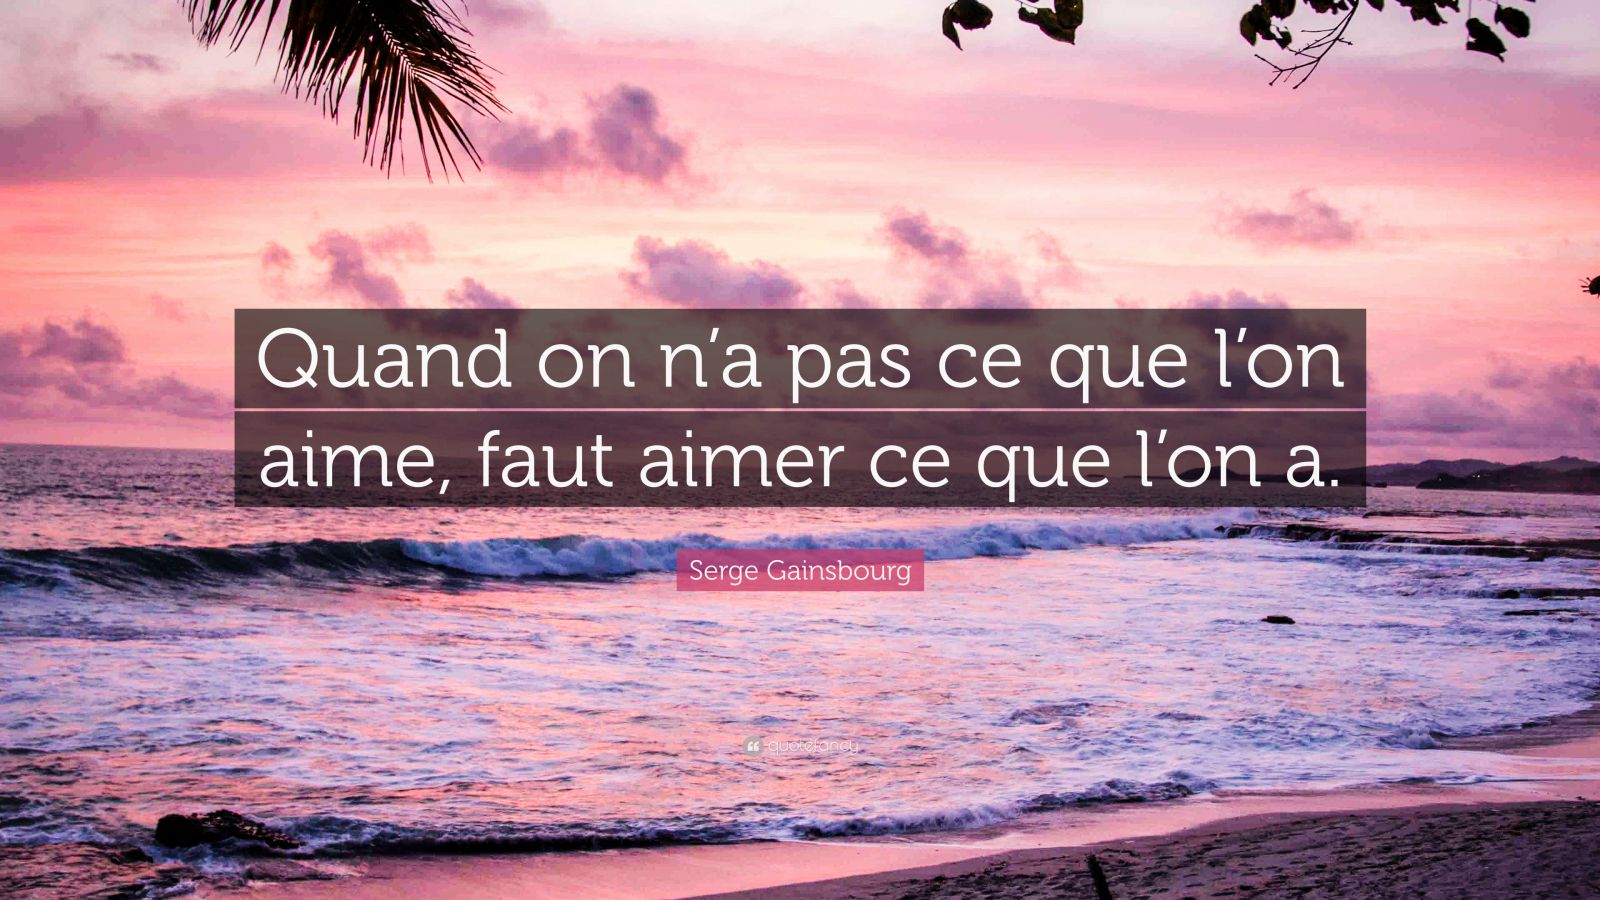 Serge Gainsbourg Quote: “Quand on n’a pas ce que l’on aime, faut aimer ...